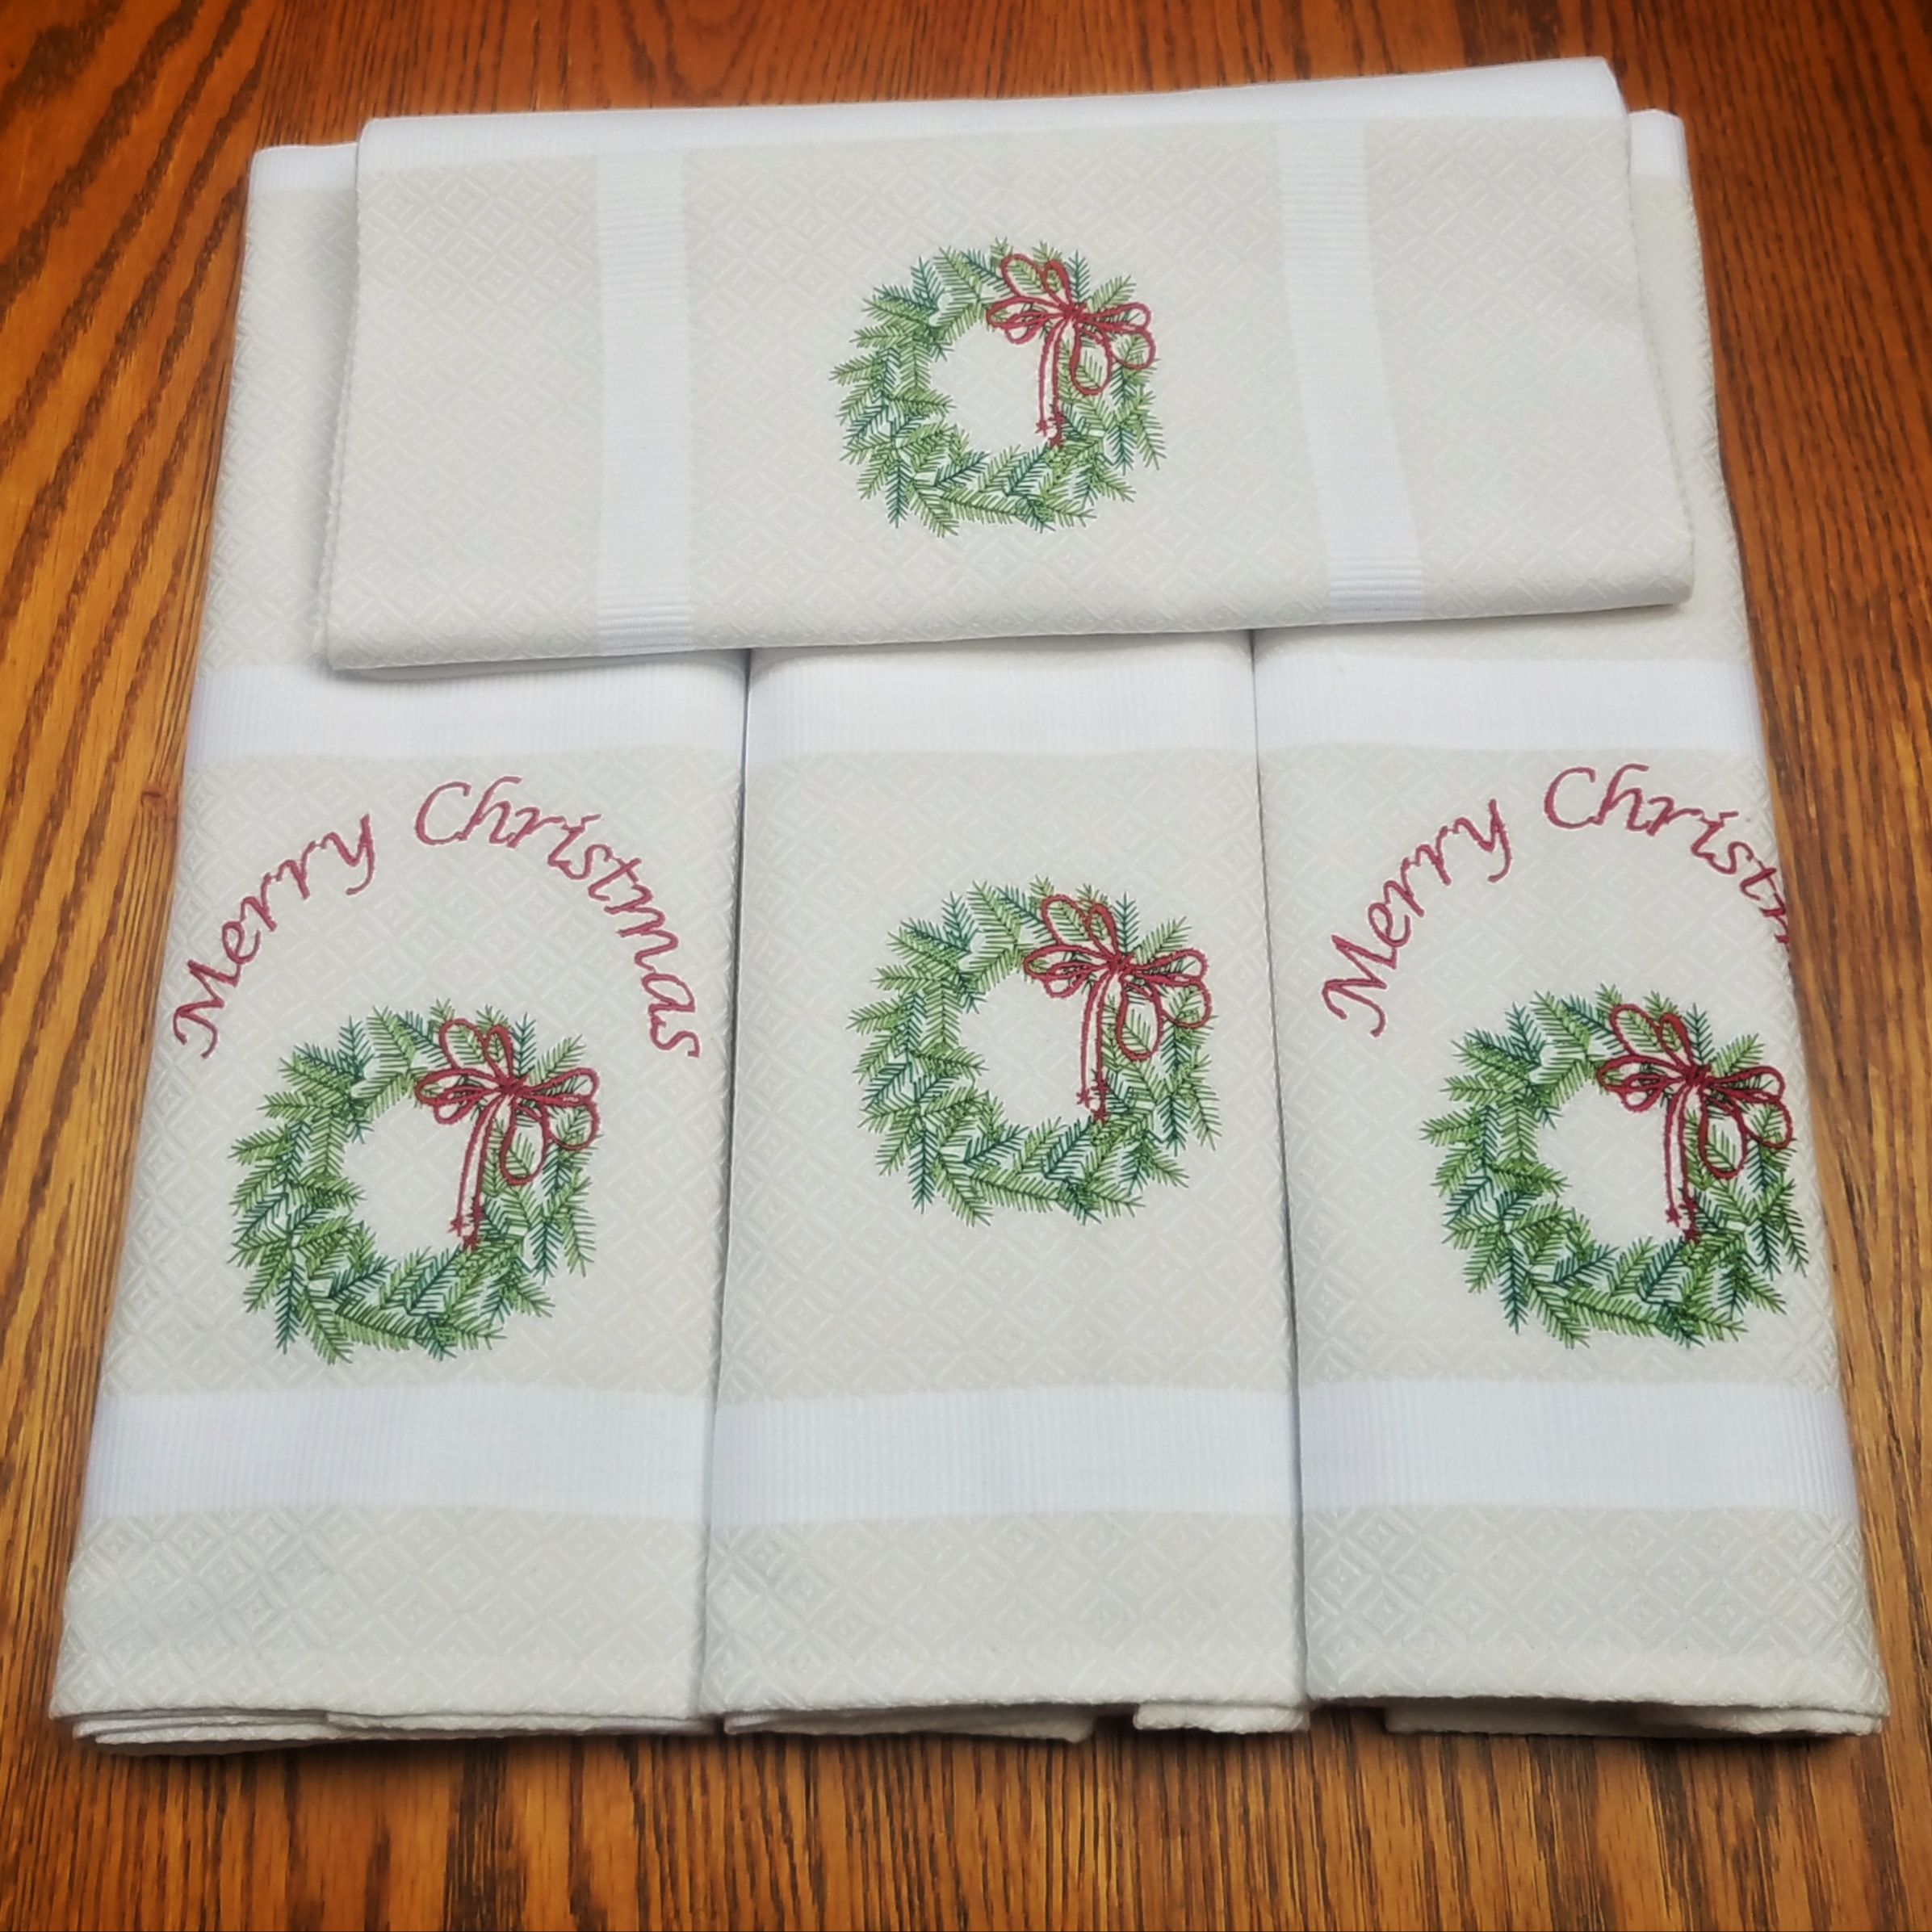 Embroidered Holiday Tea Towel, Christmas Present, Patty Bzz